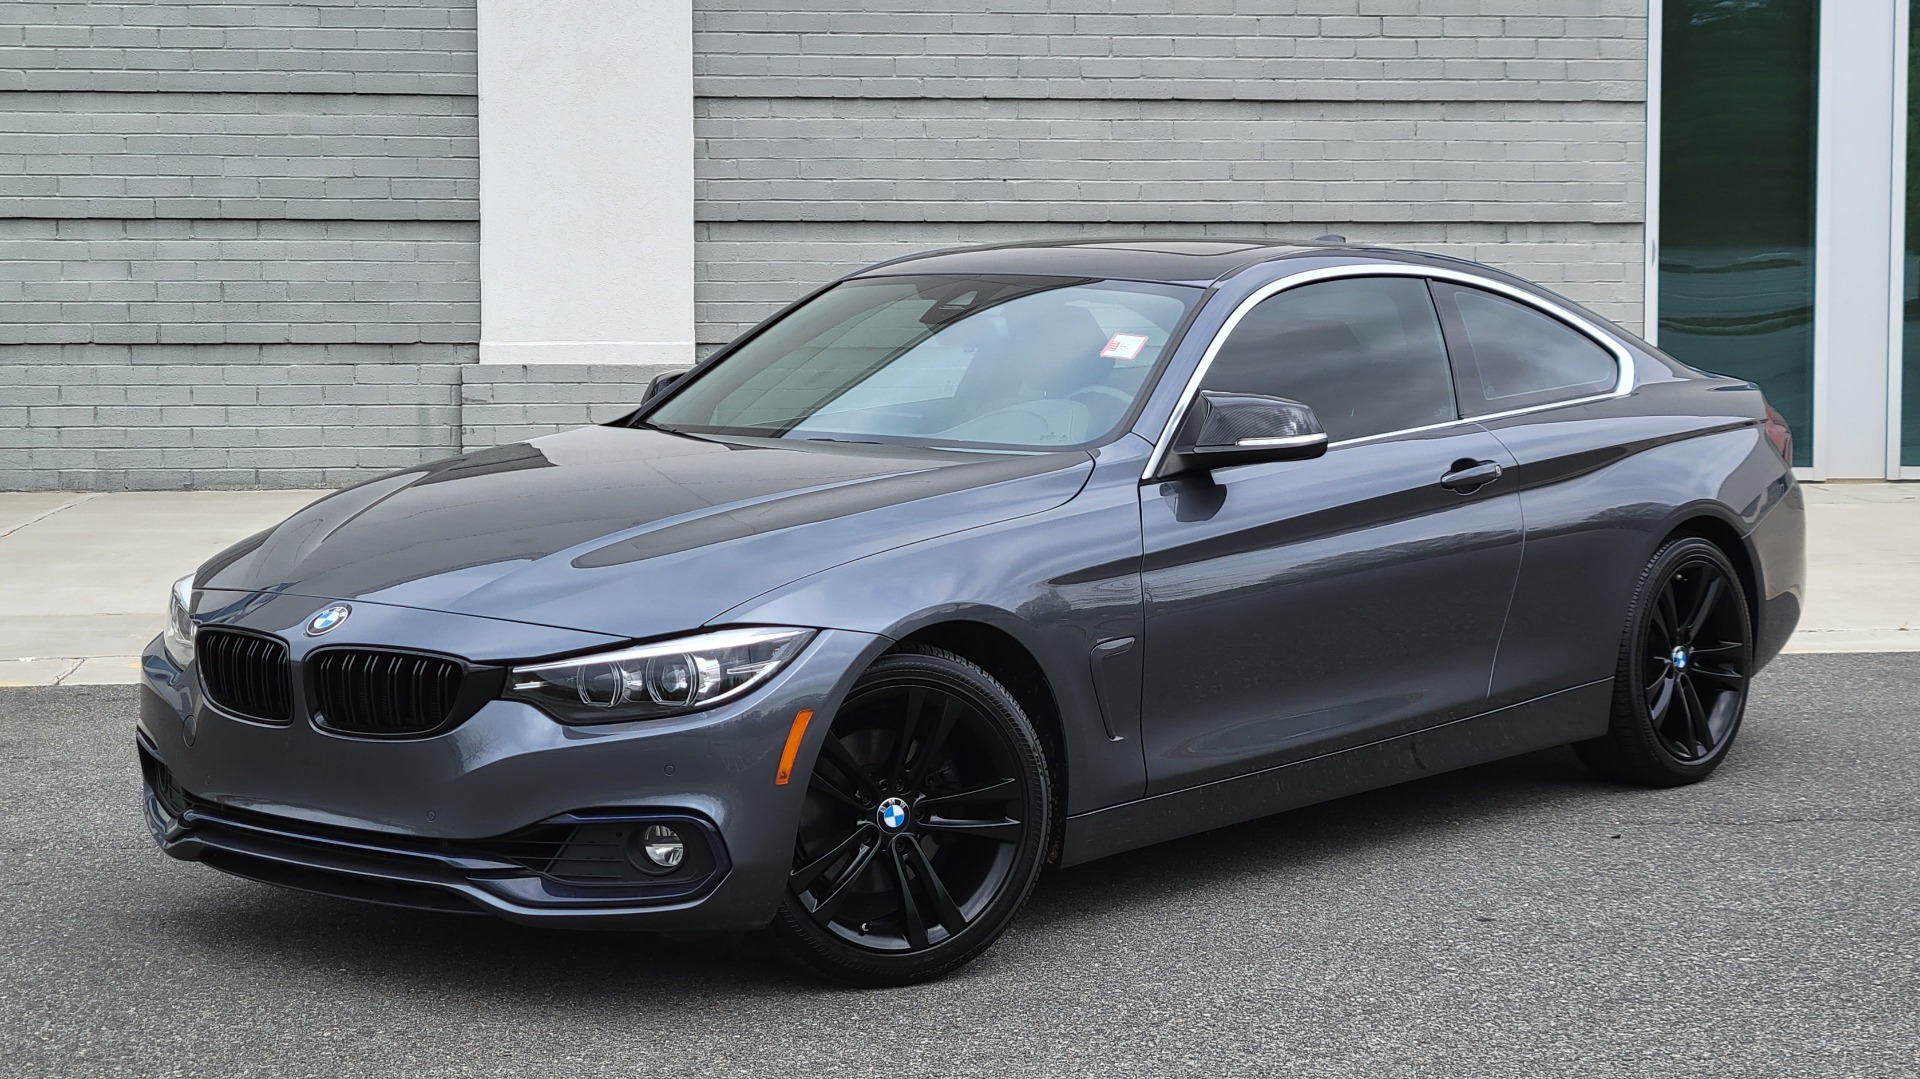 Used 2019 BMW 4 SERIES 430I COUPE 2.0L / RWD / DRVR ASST / CONV PKG / SUNROOF / REARVIEW for sale $31,295 at Formula Imports in Charlotte NC 28227 10